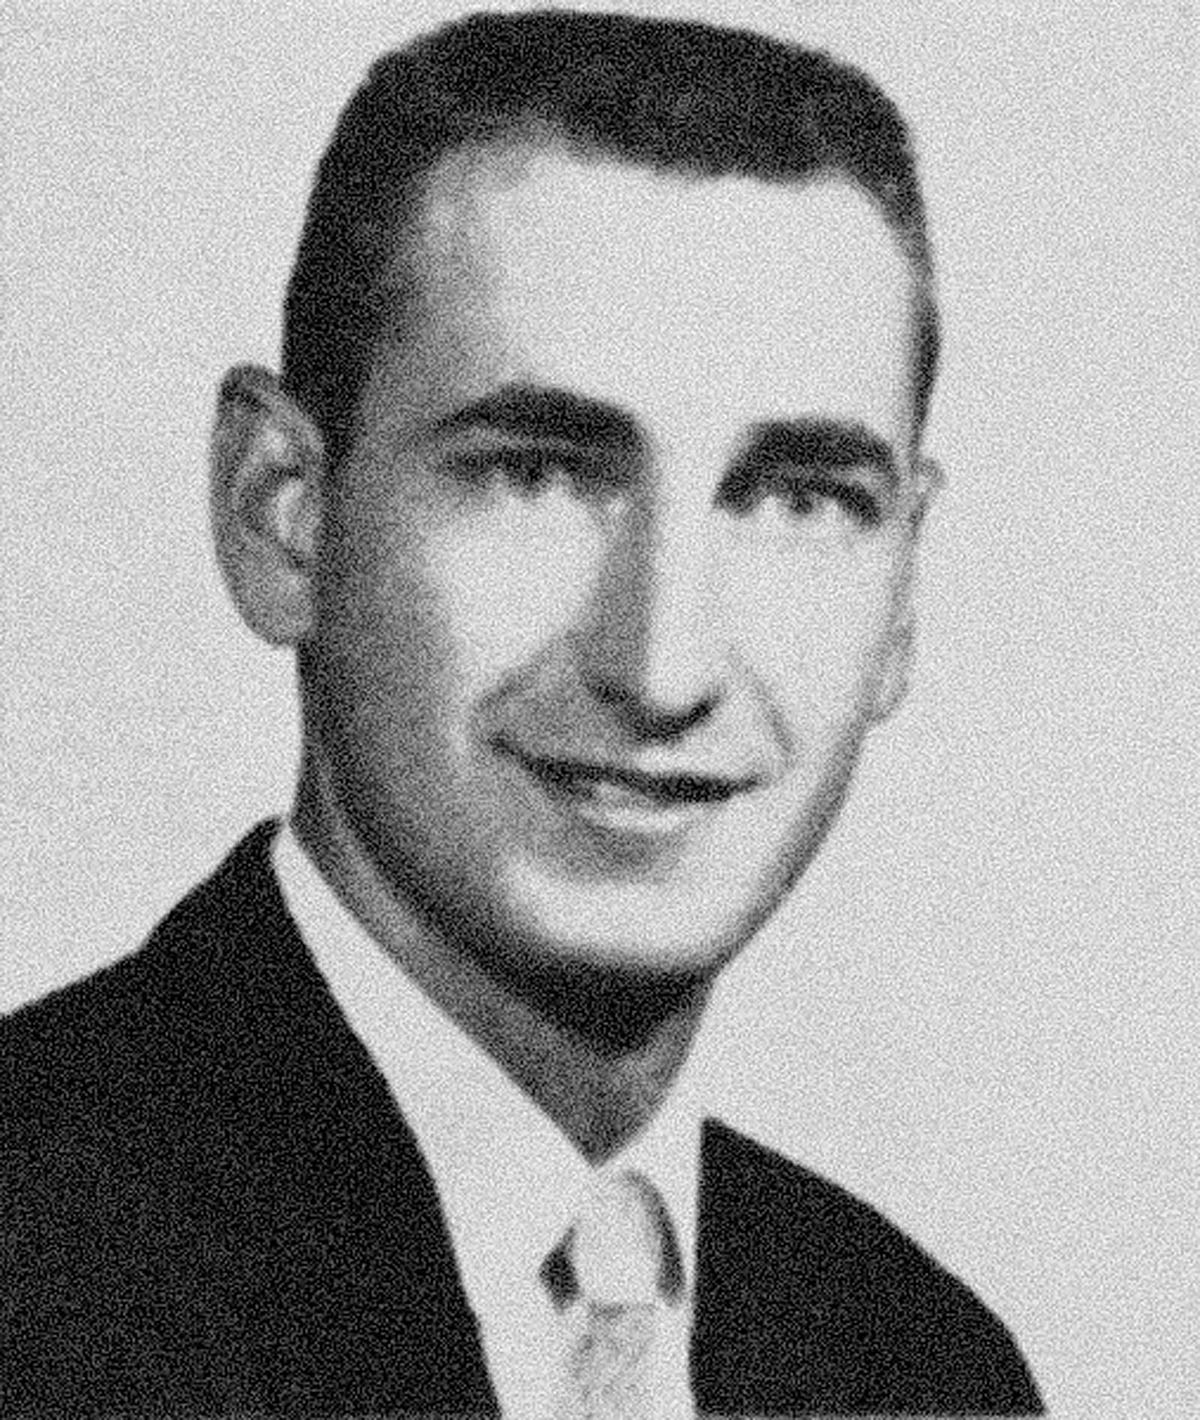 B.D. Owens, pictured as a Northwest student, graduated from the institution in 1959 and was the first alumnus to lead it.